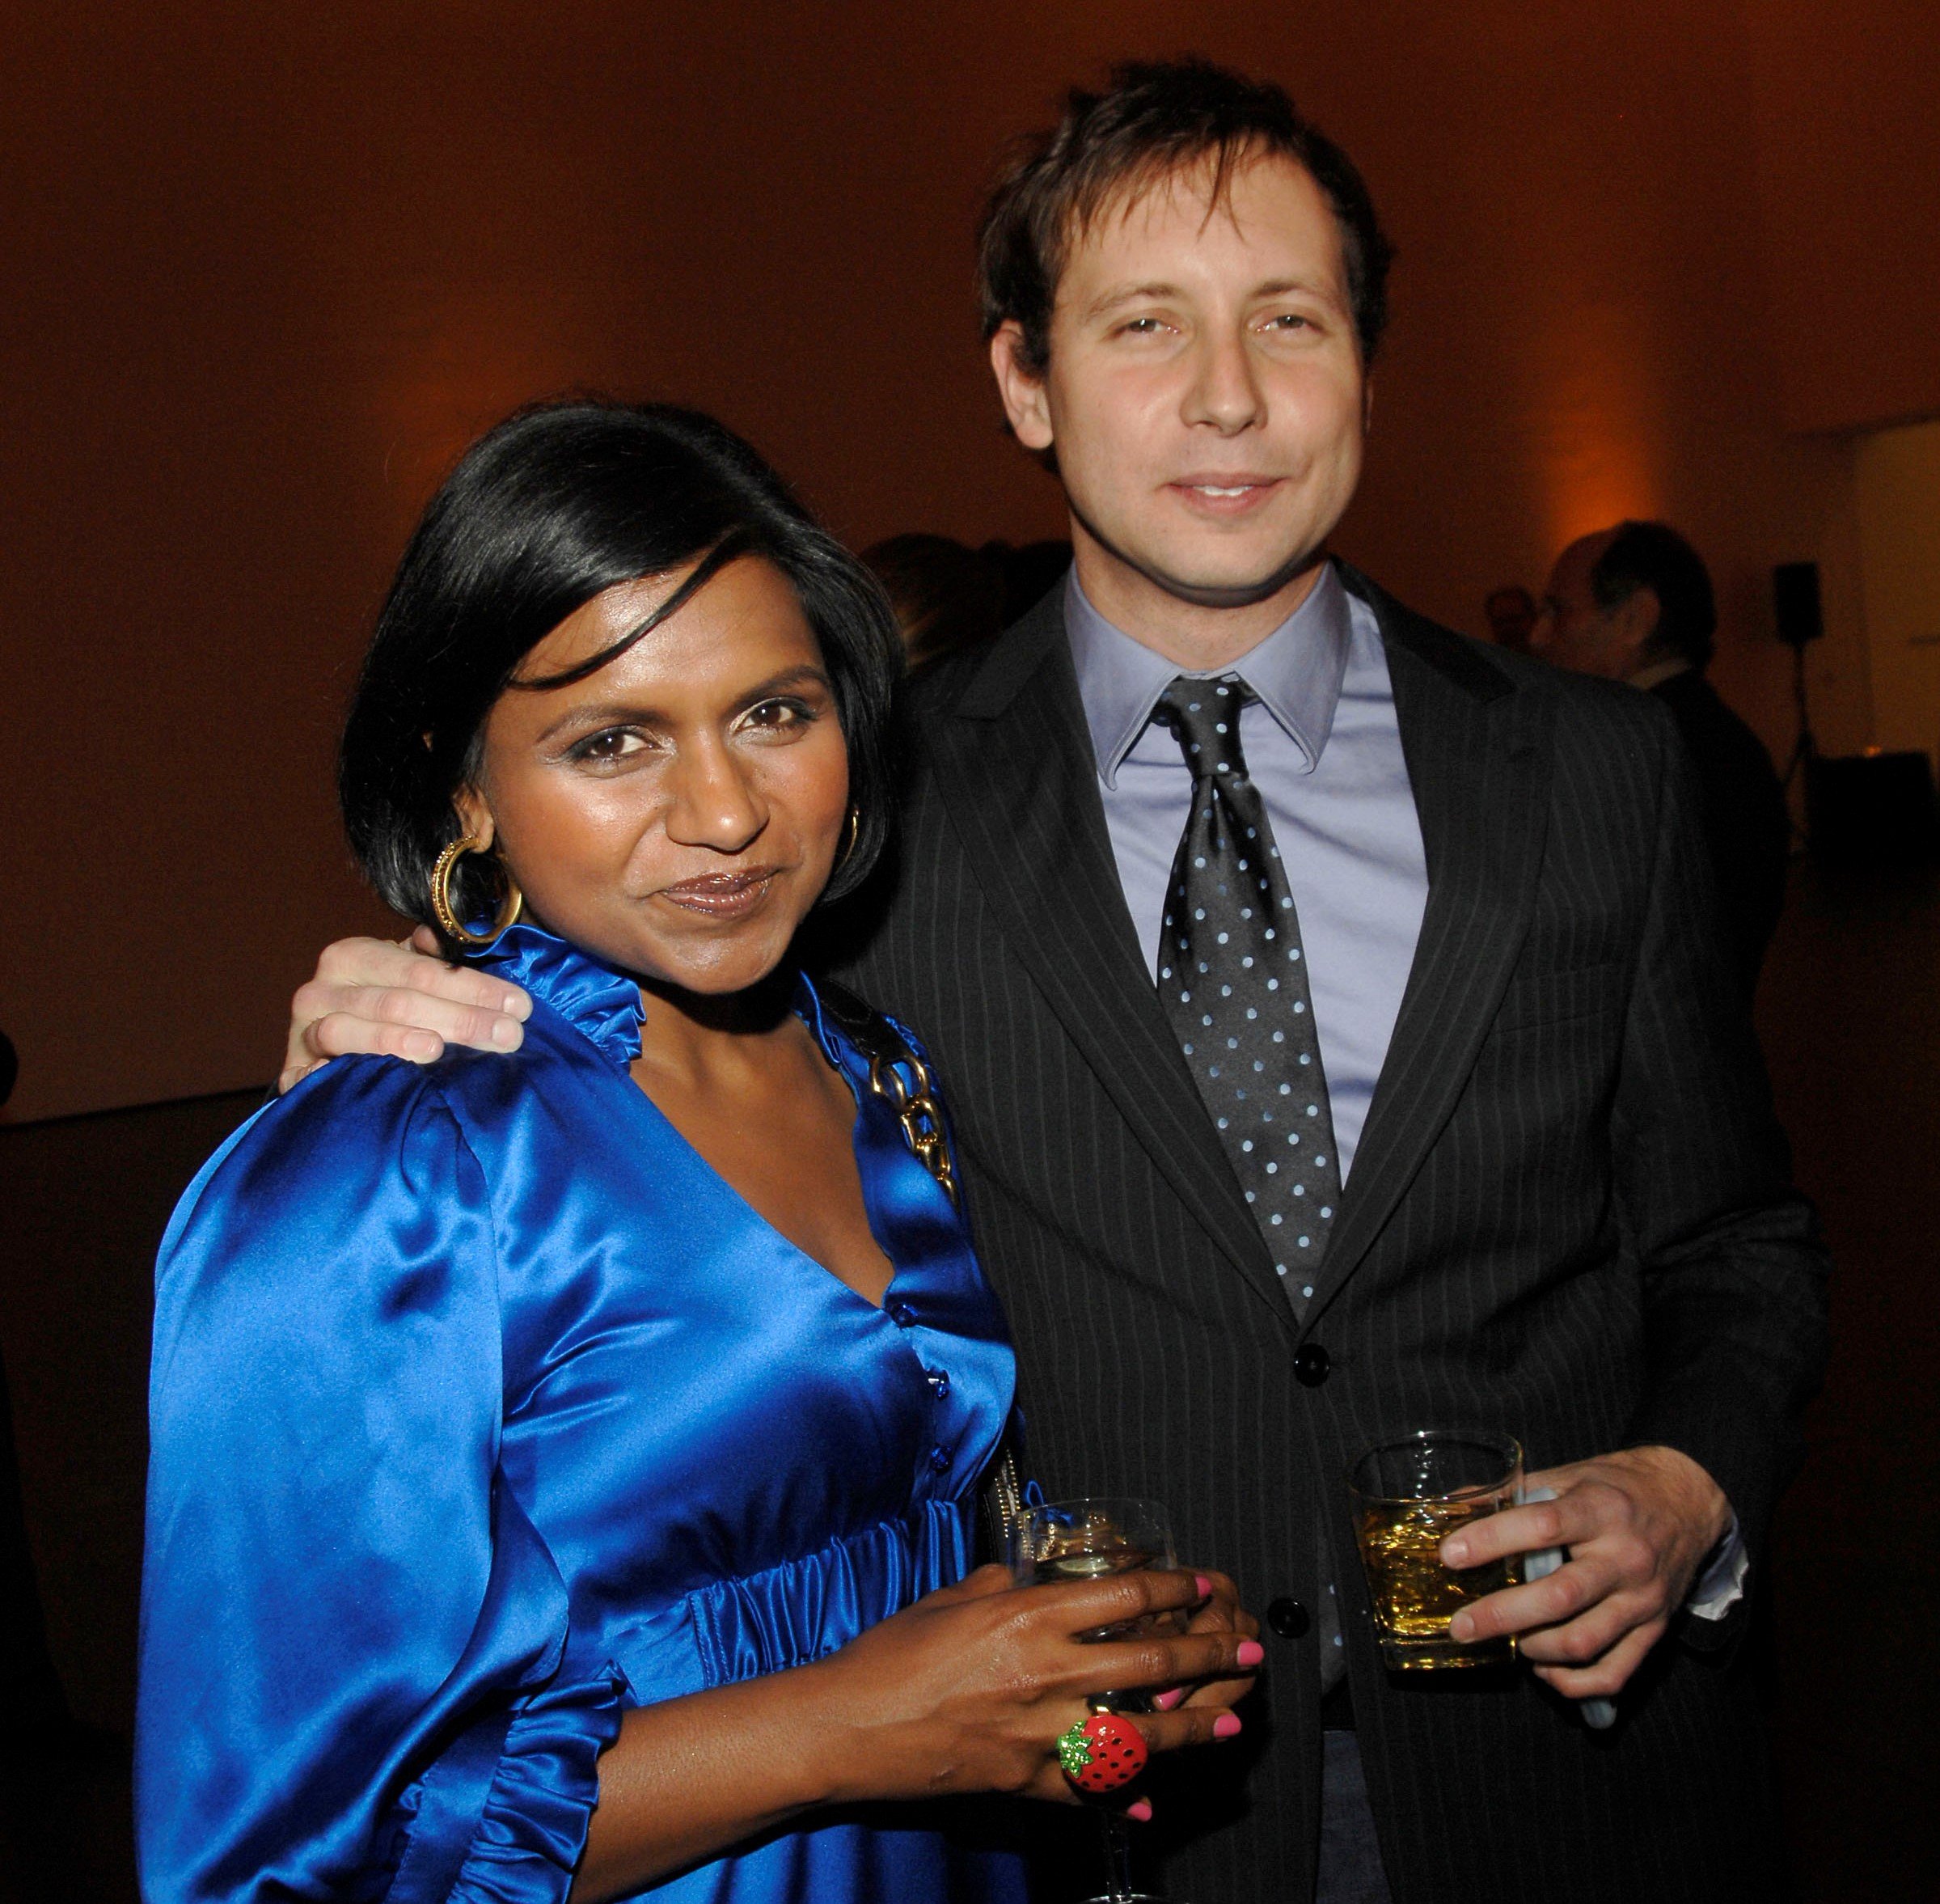  Mindy Kaling and Benjamin Nugent at a William Morris Agency Cocktail Party at The Museum of Modern Art in 2008 in New York City. | Source: Getty Images